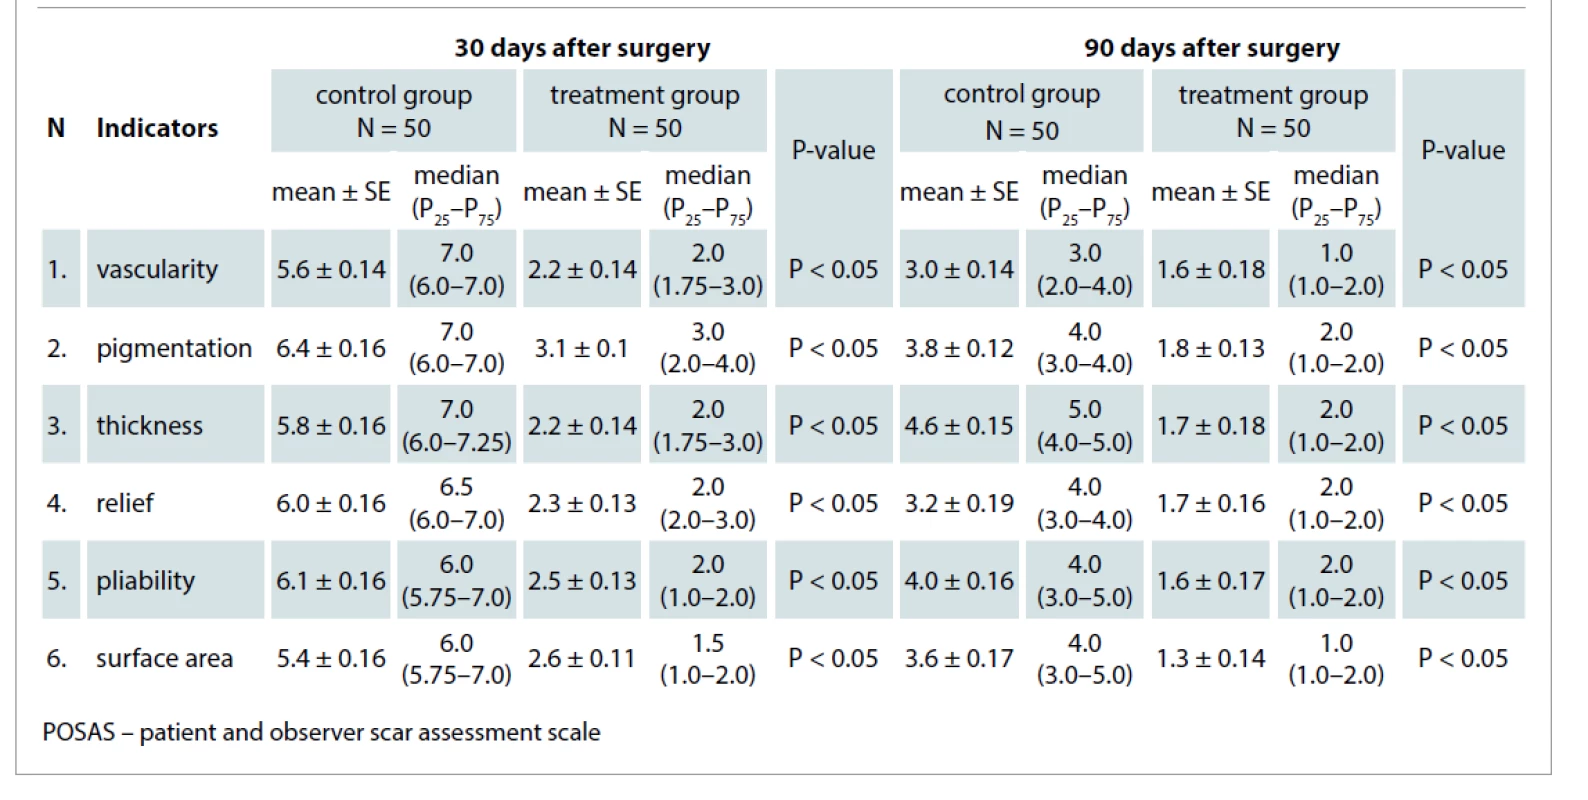 The mean observer POSAS scores in the control ad treatment groups 30 and 90 days after surgical procedures.